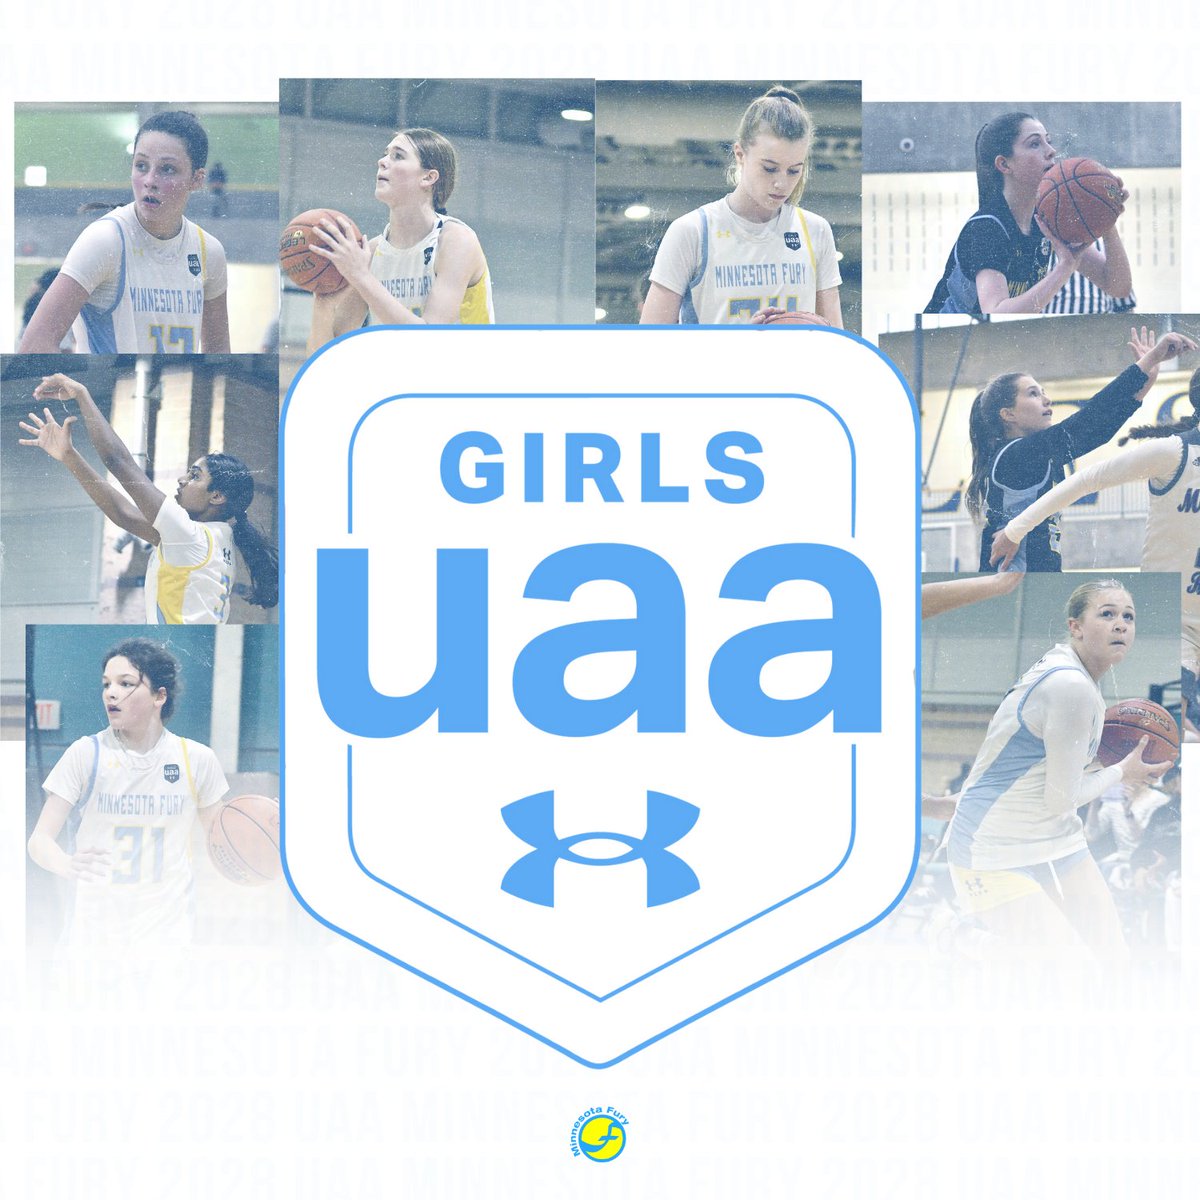 𝗕𝗥𝗘𝗔𝗞𝗜𝗡𝗚: 2028 Blue --> 𝟮𝟬𝟮𝟴 𝗨𝗔𝗔‼️ Our 𝟮𝟬𝟮𝟴 𝗨𝗔𝗔 team will compete on the 15U @UANextGHoops circuit this season! We are so excited for our players to have this opportunity. #ThisIsWhyYouFury | #UANext